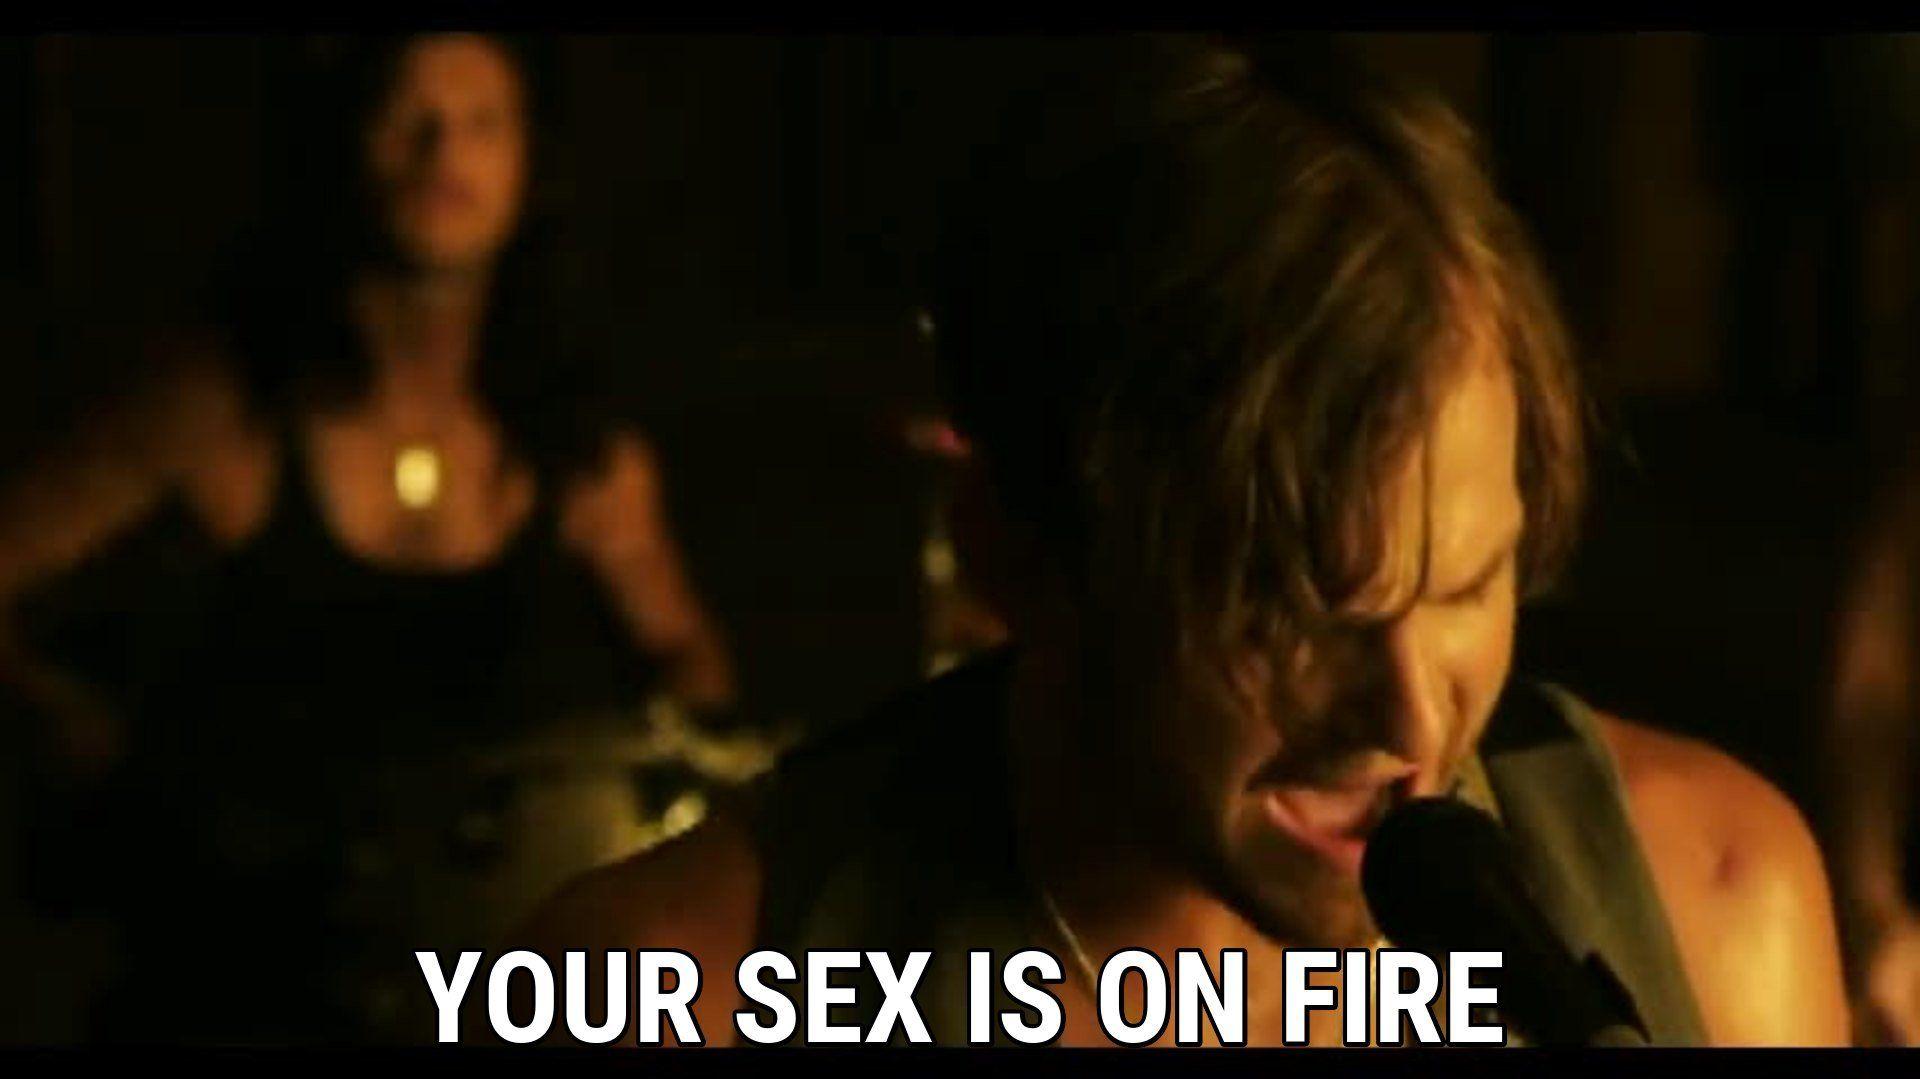 best of Kings is Your leon sex of on fire